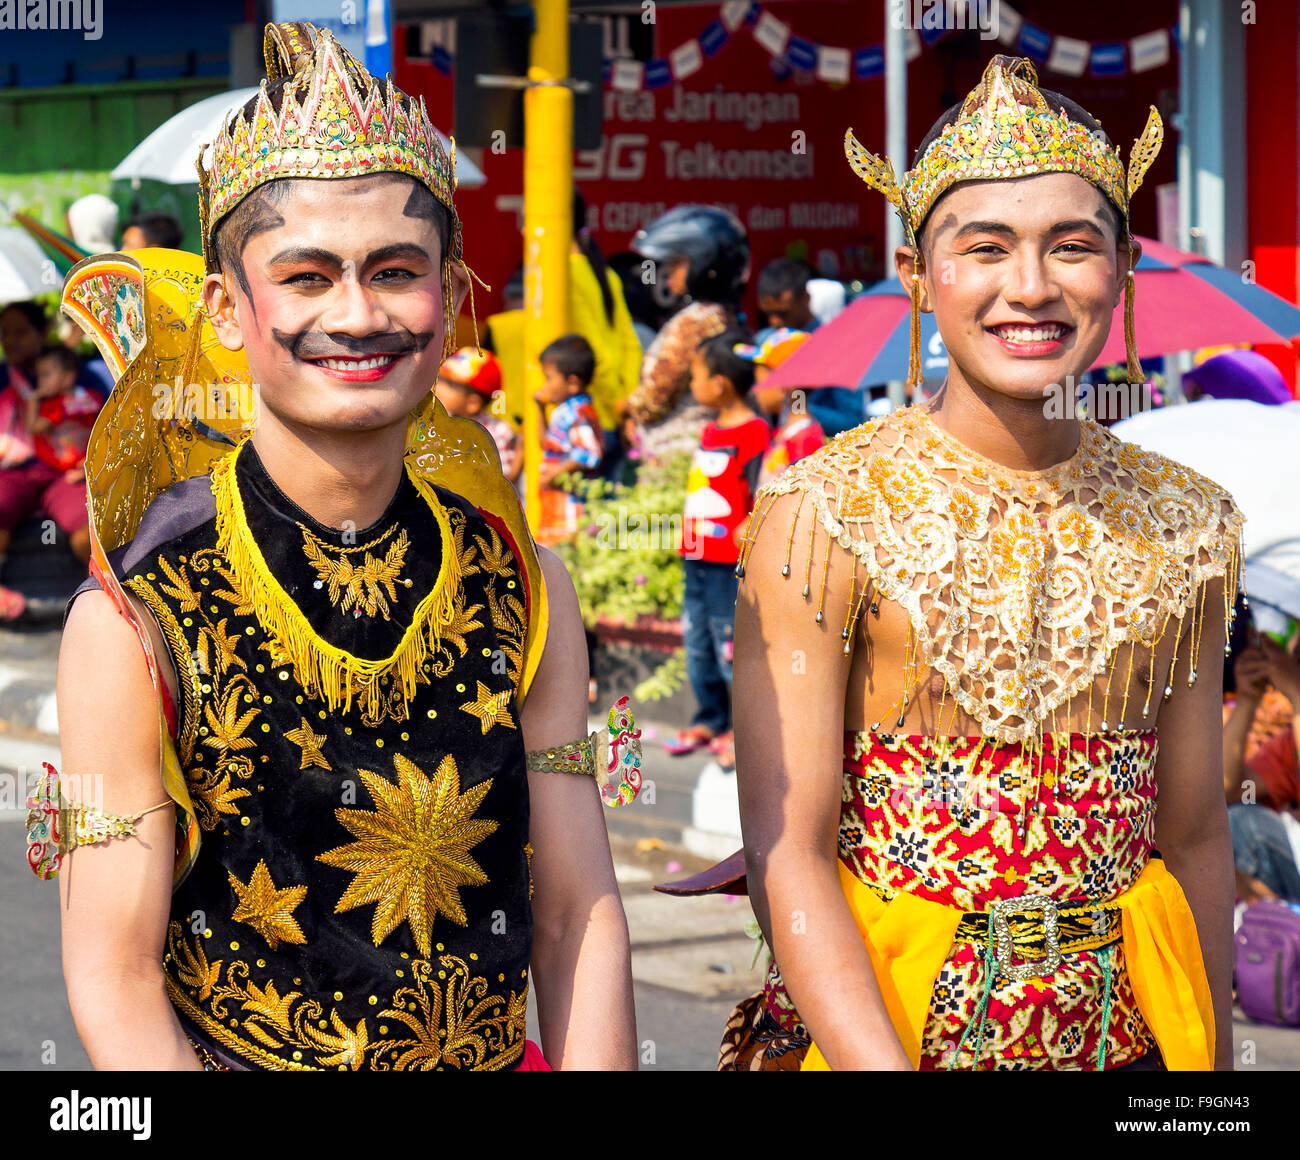 Men in costumes, National Day parade, Klaten, Central Java, Java Island, Indonesia Stock Photo